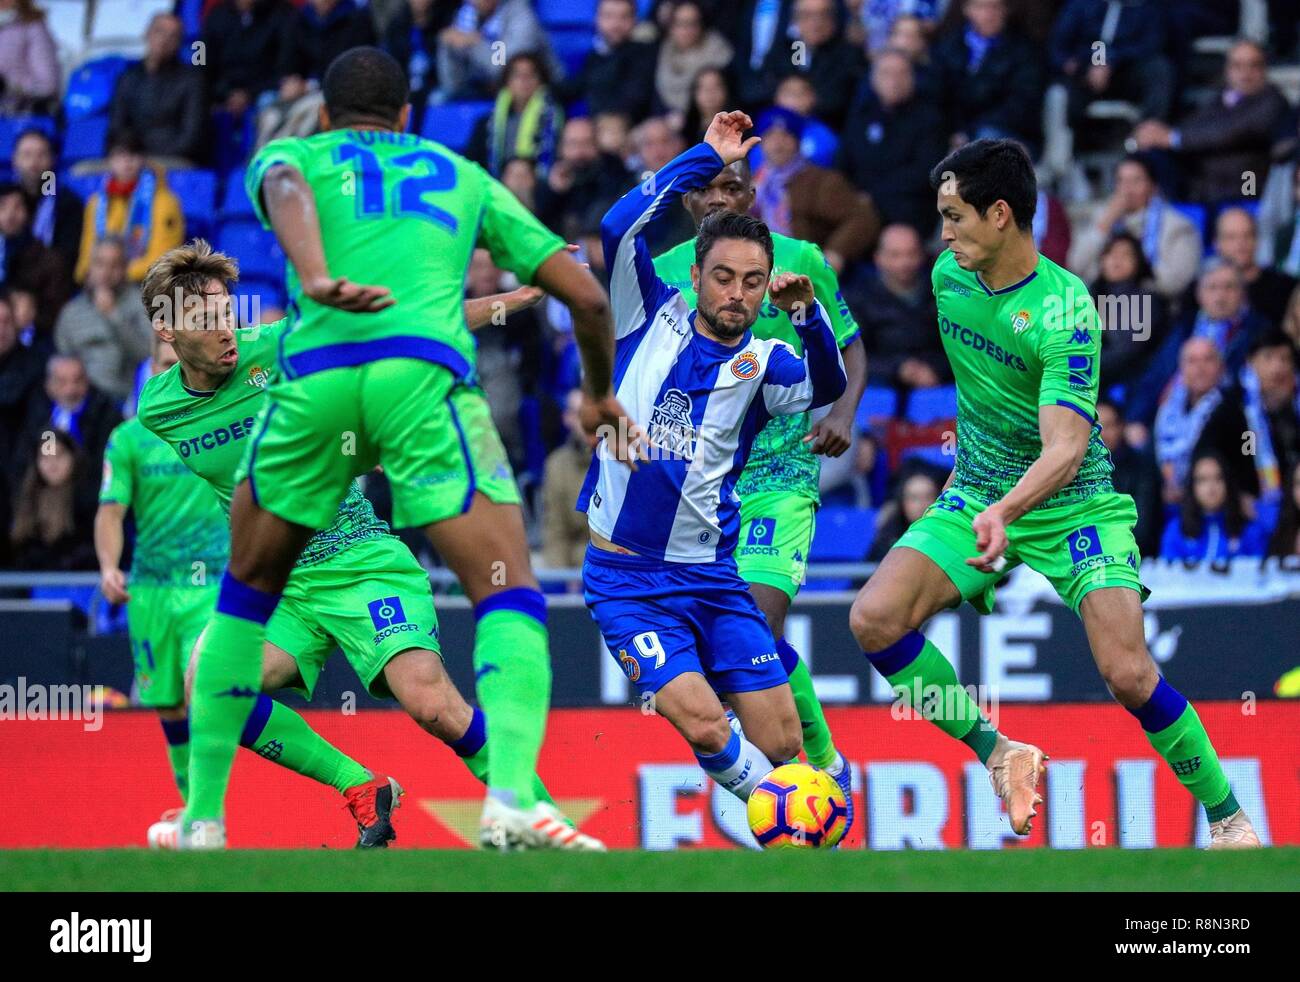 Barcelona, Spain. 16th Dec, 2018. RCD Espanyol's Sergio Garcia (C) vies for the ball during a Spanish league match between RCD Espanyol and Real Betis in Barcelona, Spain, on Dec. 16, 2018. Real Betis won 3-1. Credit: Joan Gosa/Xinhua/Alamy Live News Stock Photo